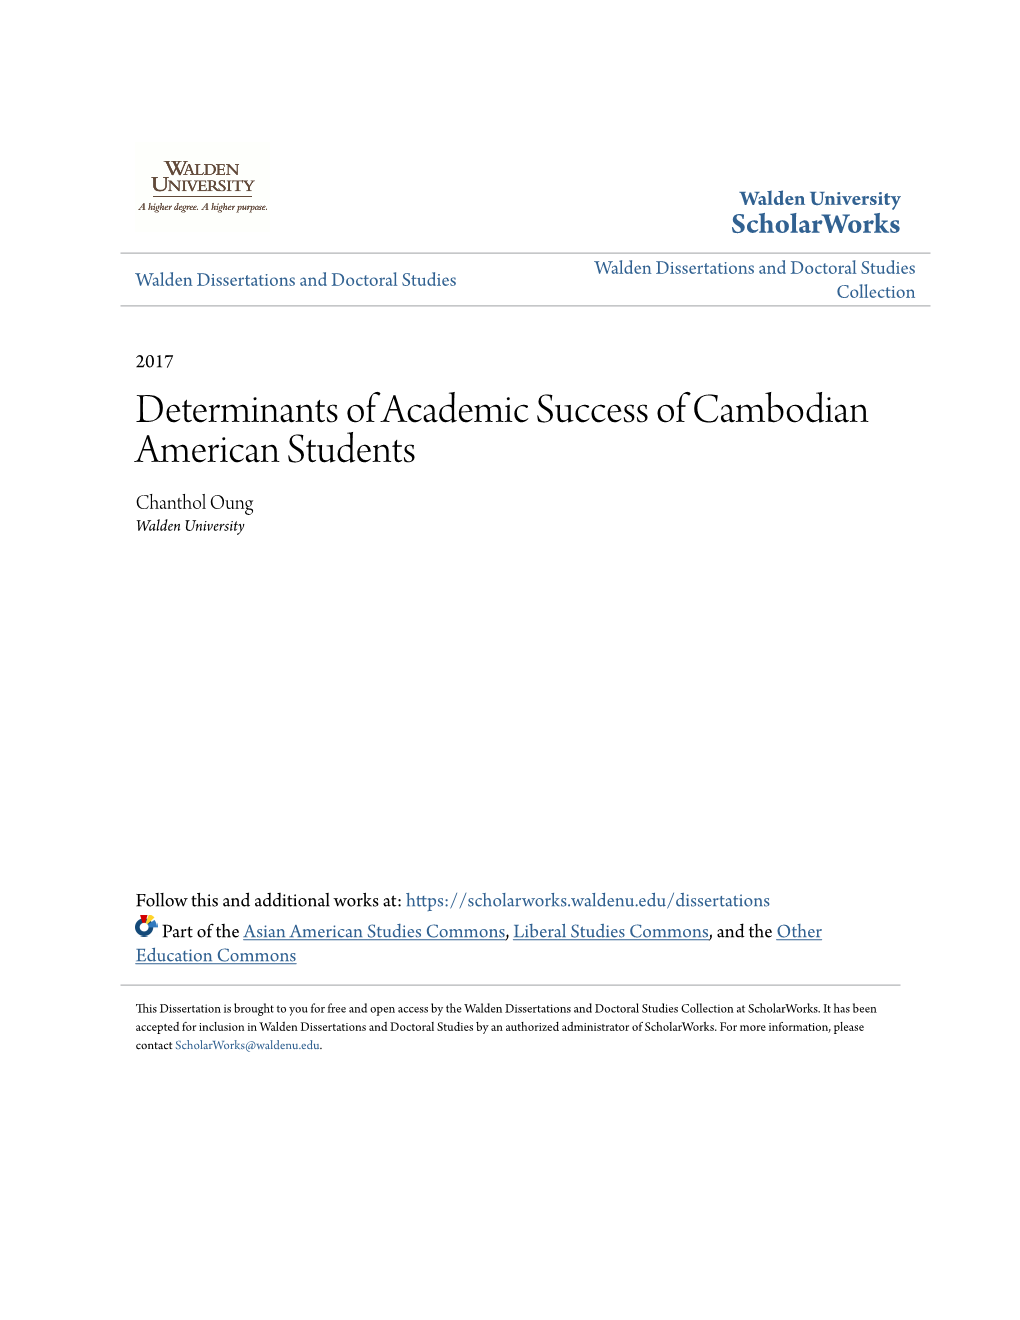 Determinants of Academic Success of Cambodian American Students Chanthol Oung Walden University